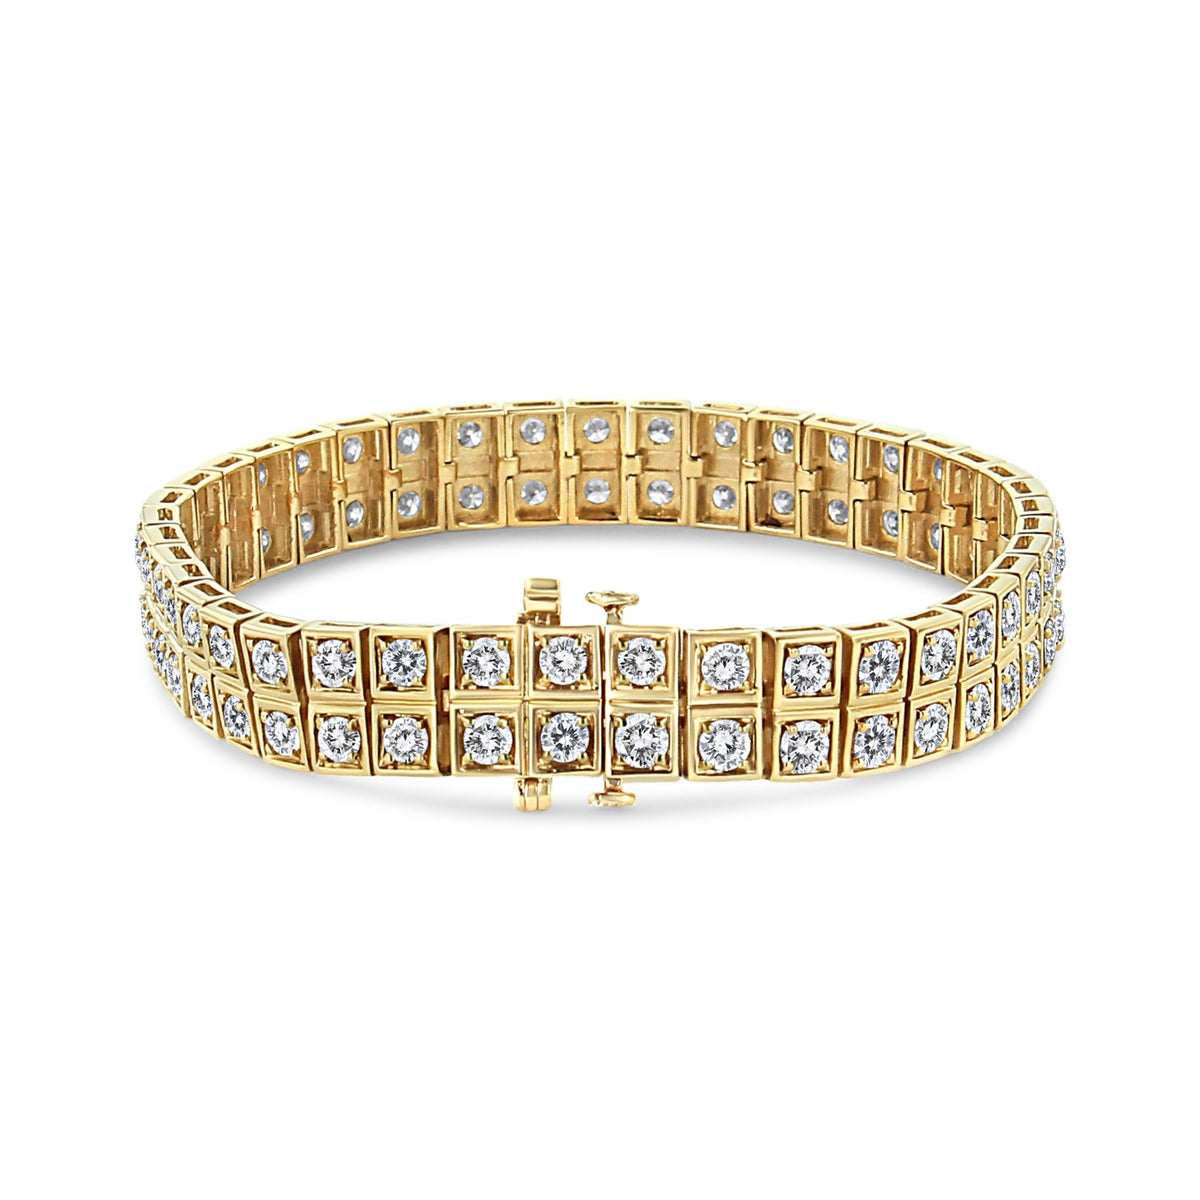 10K Yellow Gold 8.00 Cttw Round-Cut Diamond Two Row Square Link Tennis Bracelet (K-L Color, I1-I2 Clarity) - 7.25&quot; Inches - LinkagejewelrydesignLinkagejewelrydesign